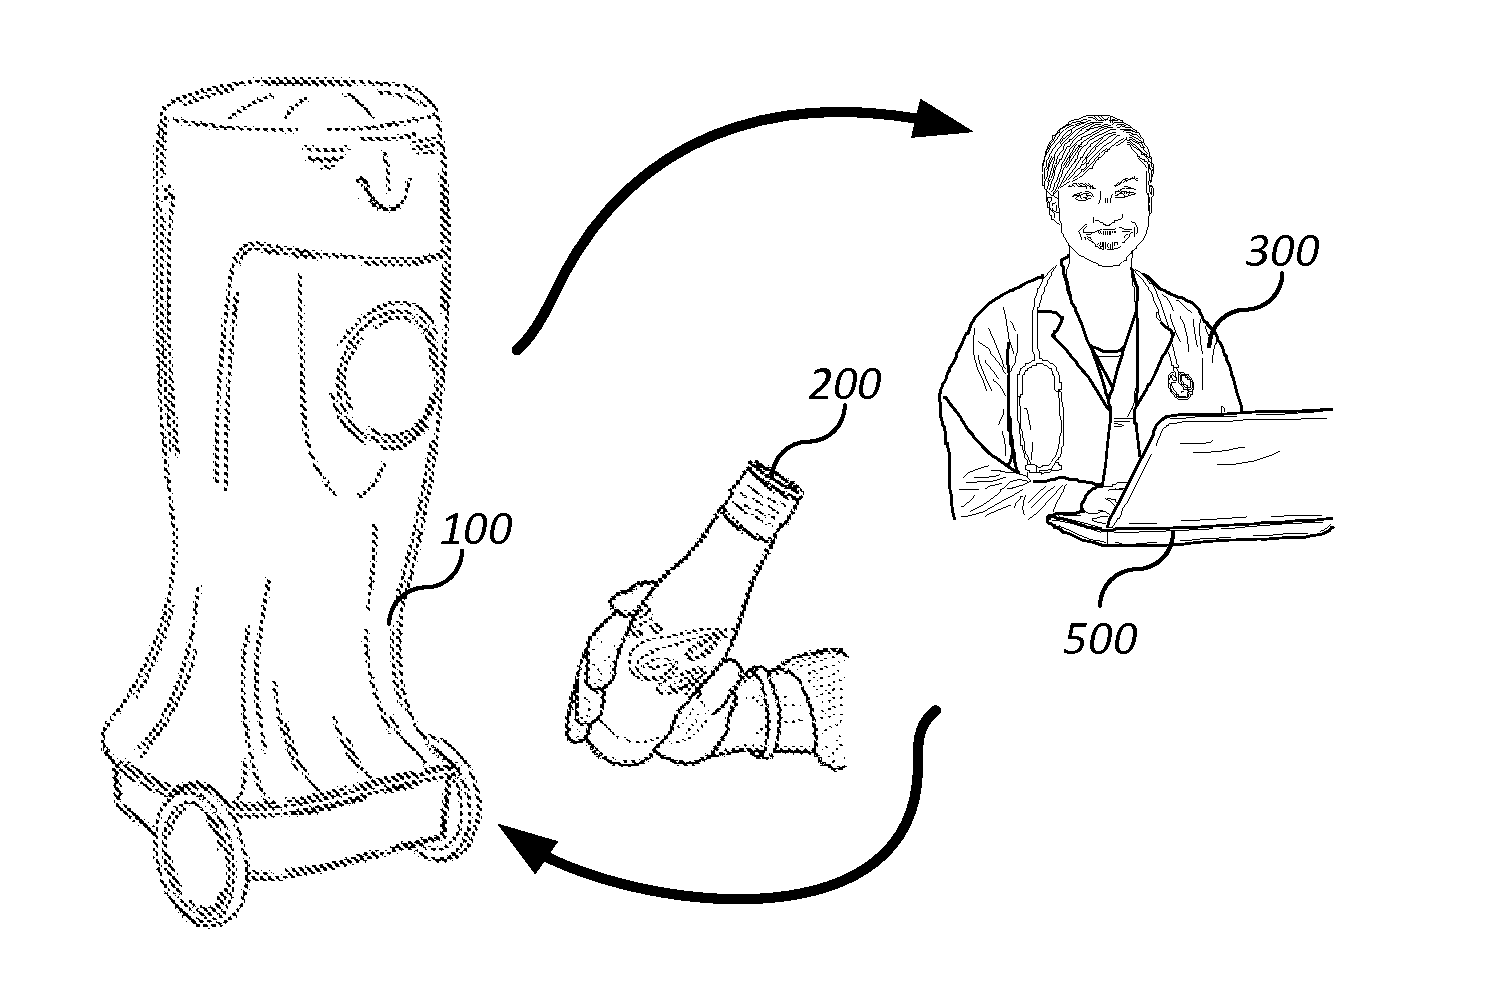 System and method of selling goods or services, or collecting recycle refuse using mechanized mobile merchantry